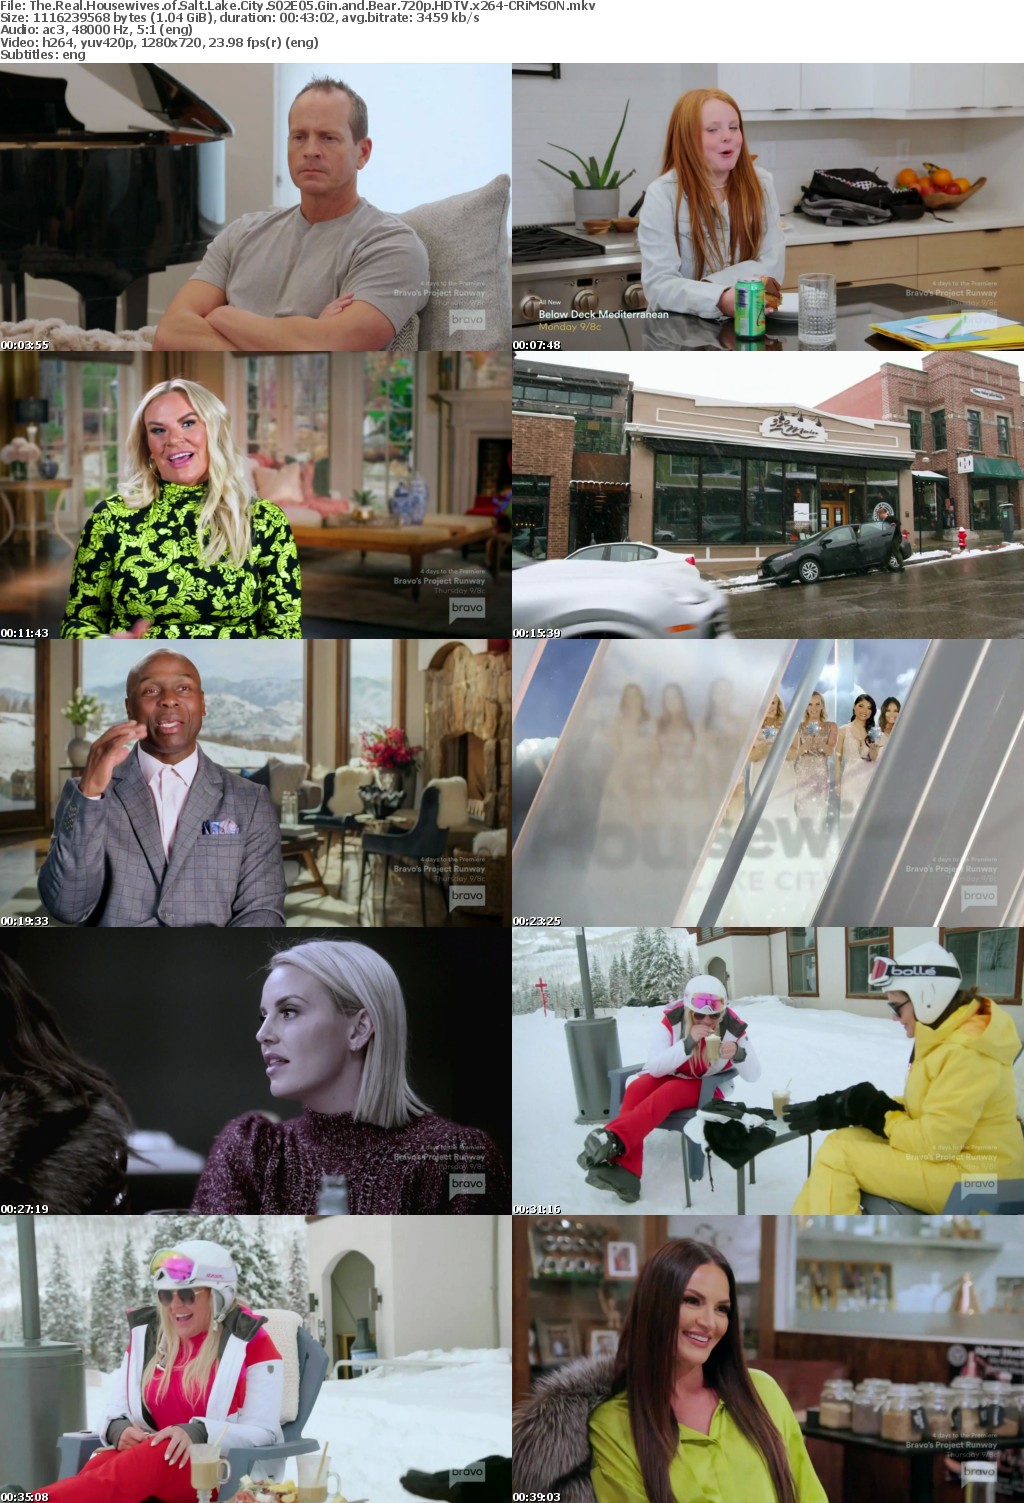 The Real Housewives of Salt Lake City S02E05 Gin and Bear 720p HDTV x264-CRiMSON